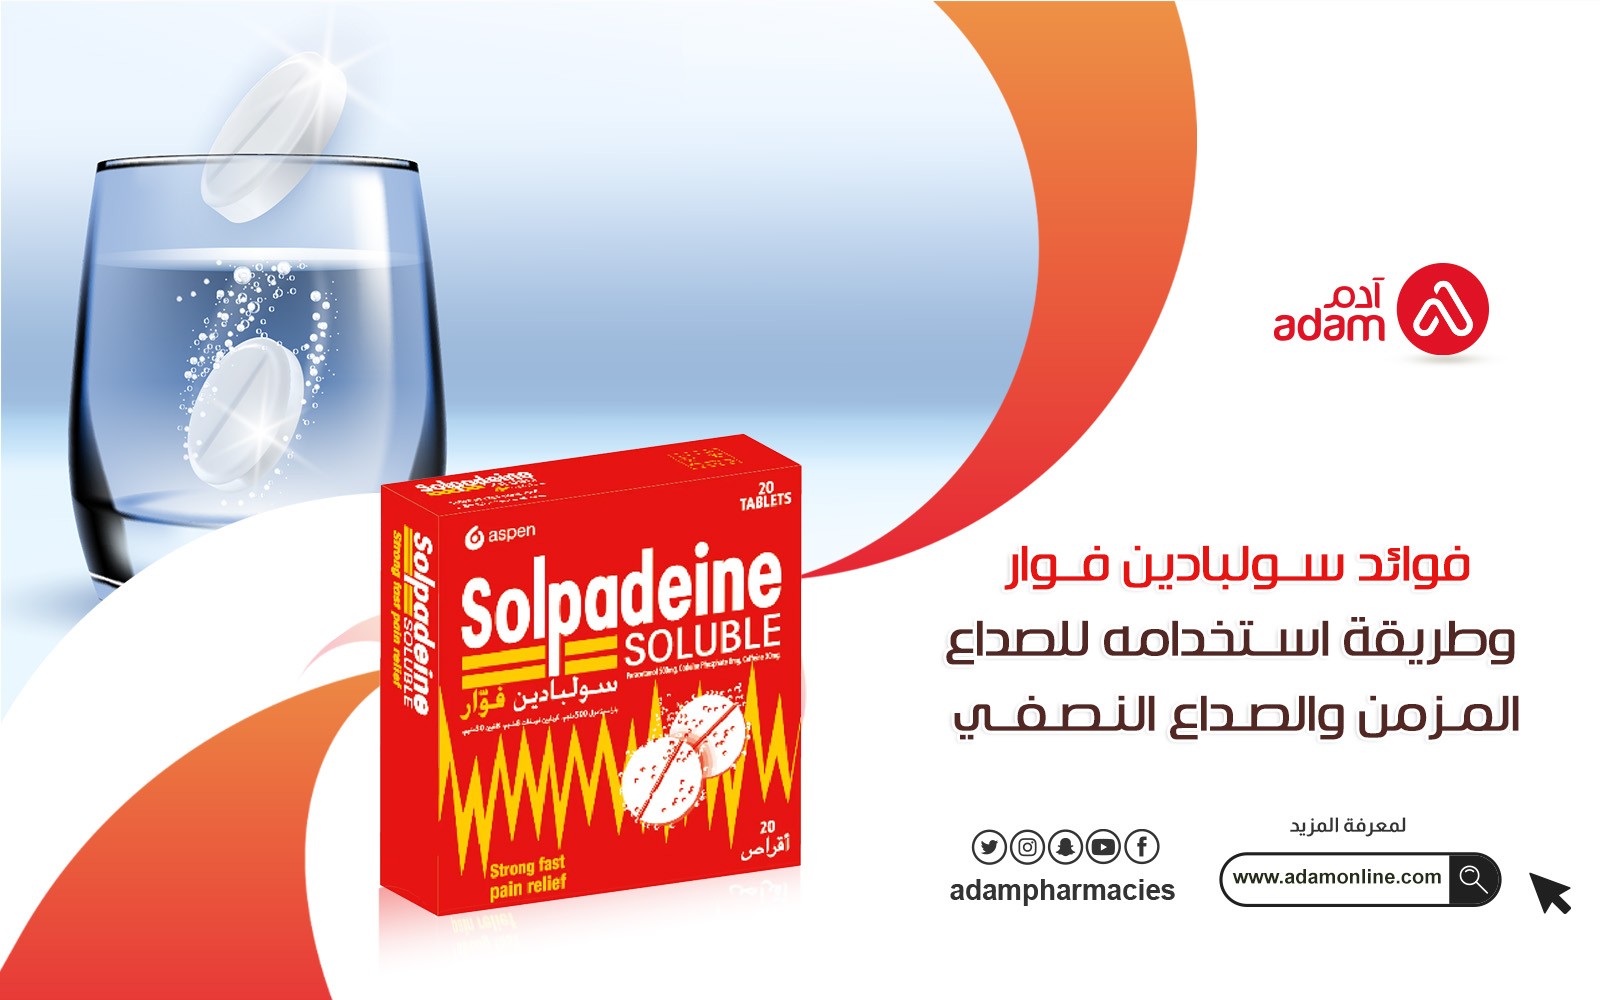 The benefits of Solpadeine effervescent and how to use it for chronic headaches and migraines